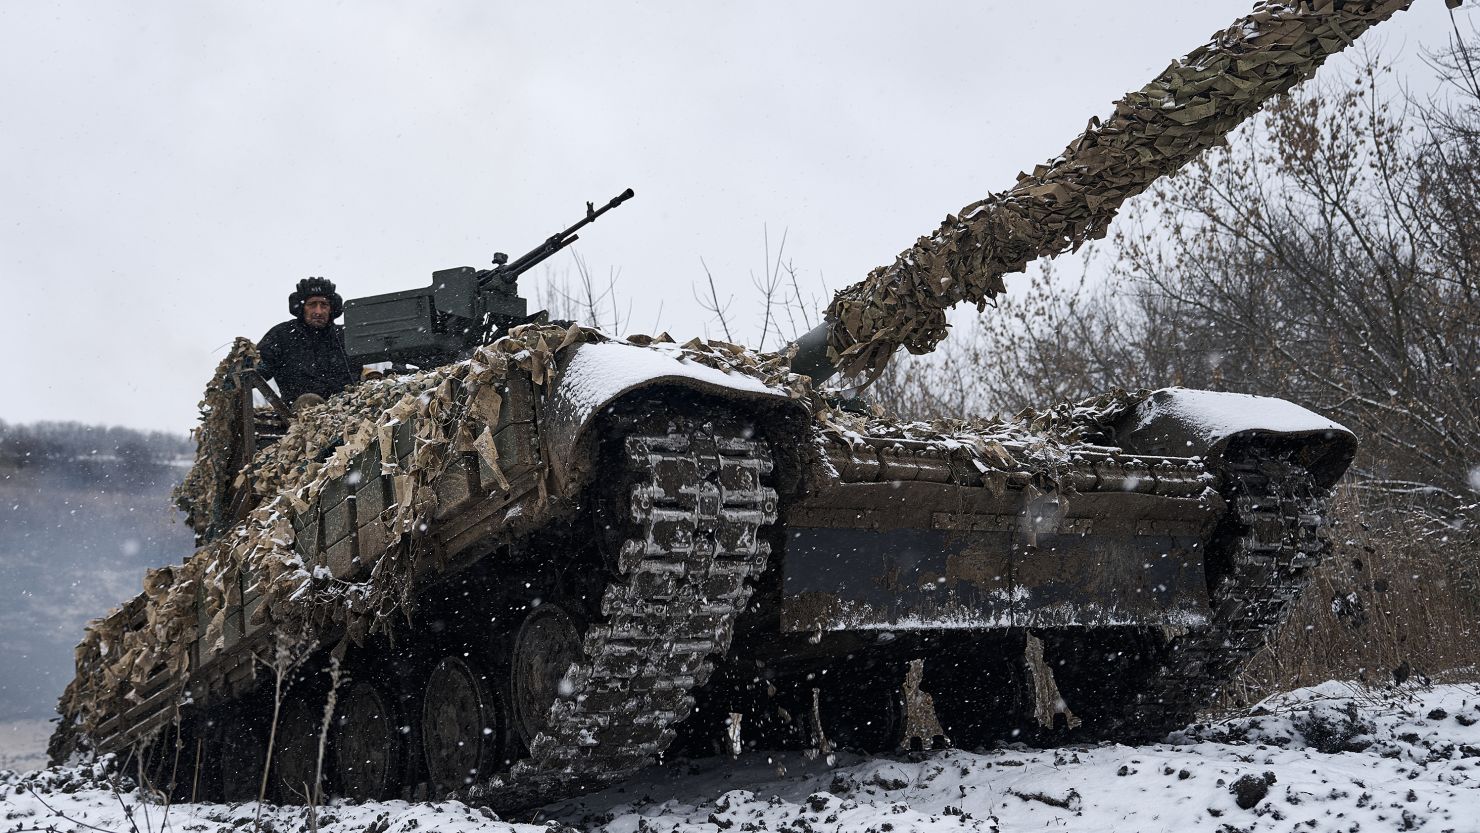 BAKHMUT REGION, UKRAINE - DECEMBER 8:  A Ukrainian T-64 tank goes on combat duty in the area of Bakhmut district on December 8, 2023 in Bakhmut Region, Ukraine.  Ukrainian forces continue to fight to retake Bakhmut, which was captured by Russian forces in May, following a yearlong war battle. Over the summer, Ukraine regained territory north and south of Bakhmut but Russia has held the city itself. (Kostya Liberov/Libkos/Getty Images)